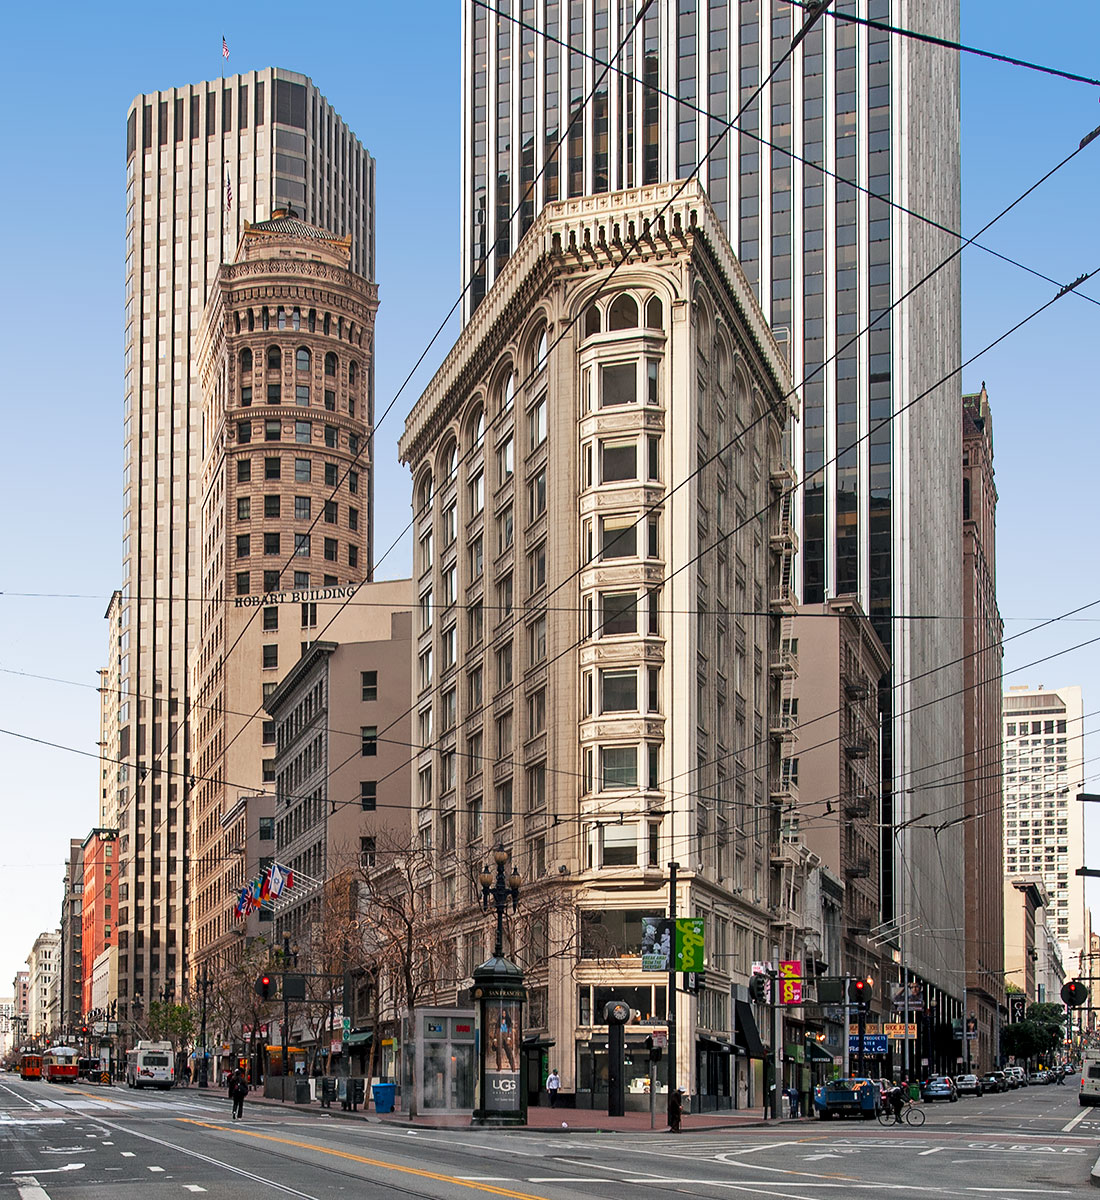 The Flatiron Building was designed by Havens & Toepke and built in 1913.